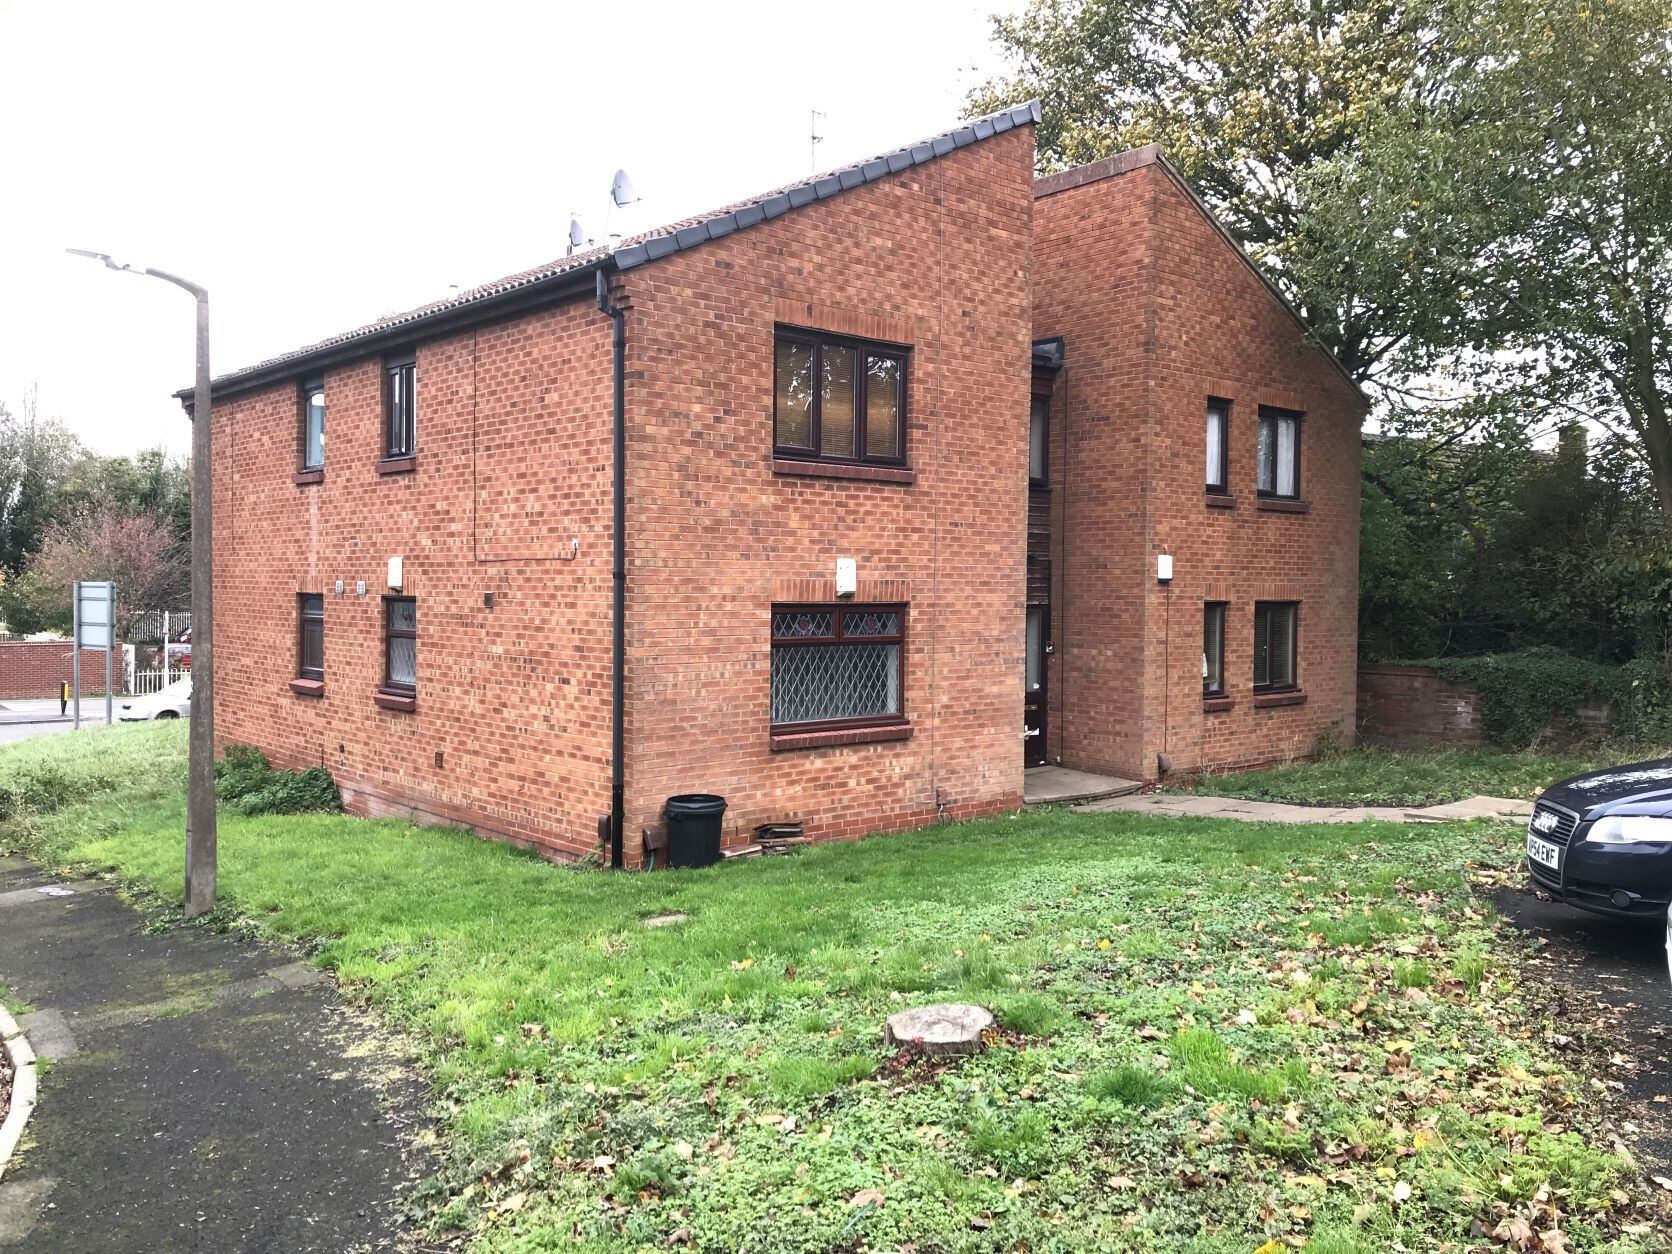 Bargain Black Country homes going under the hammer from £9k